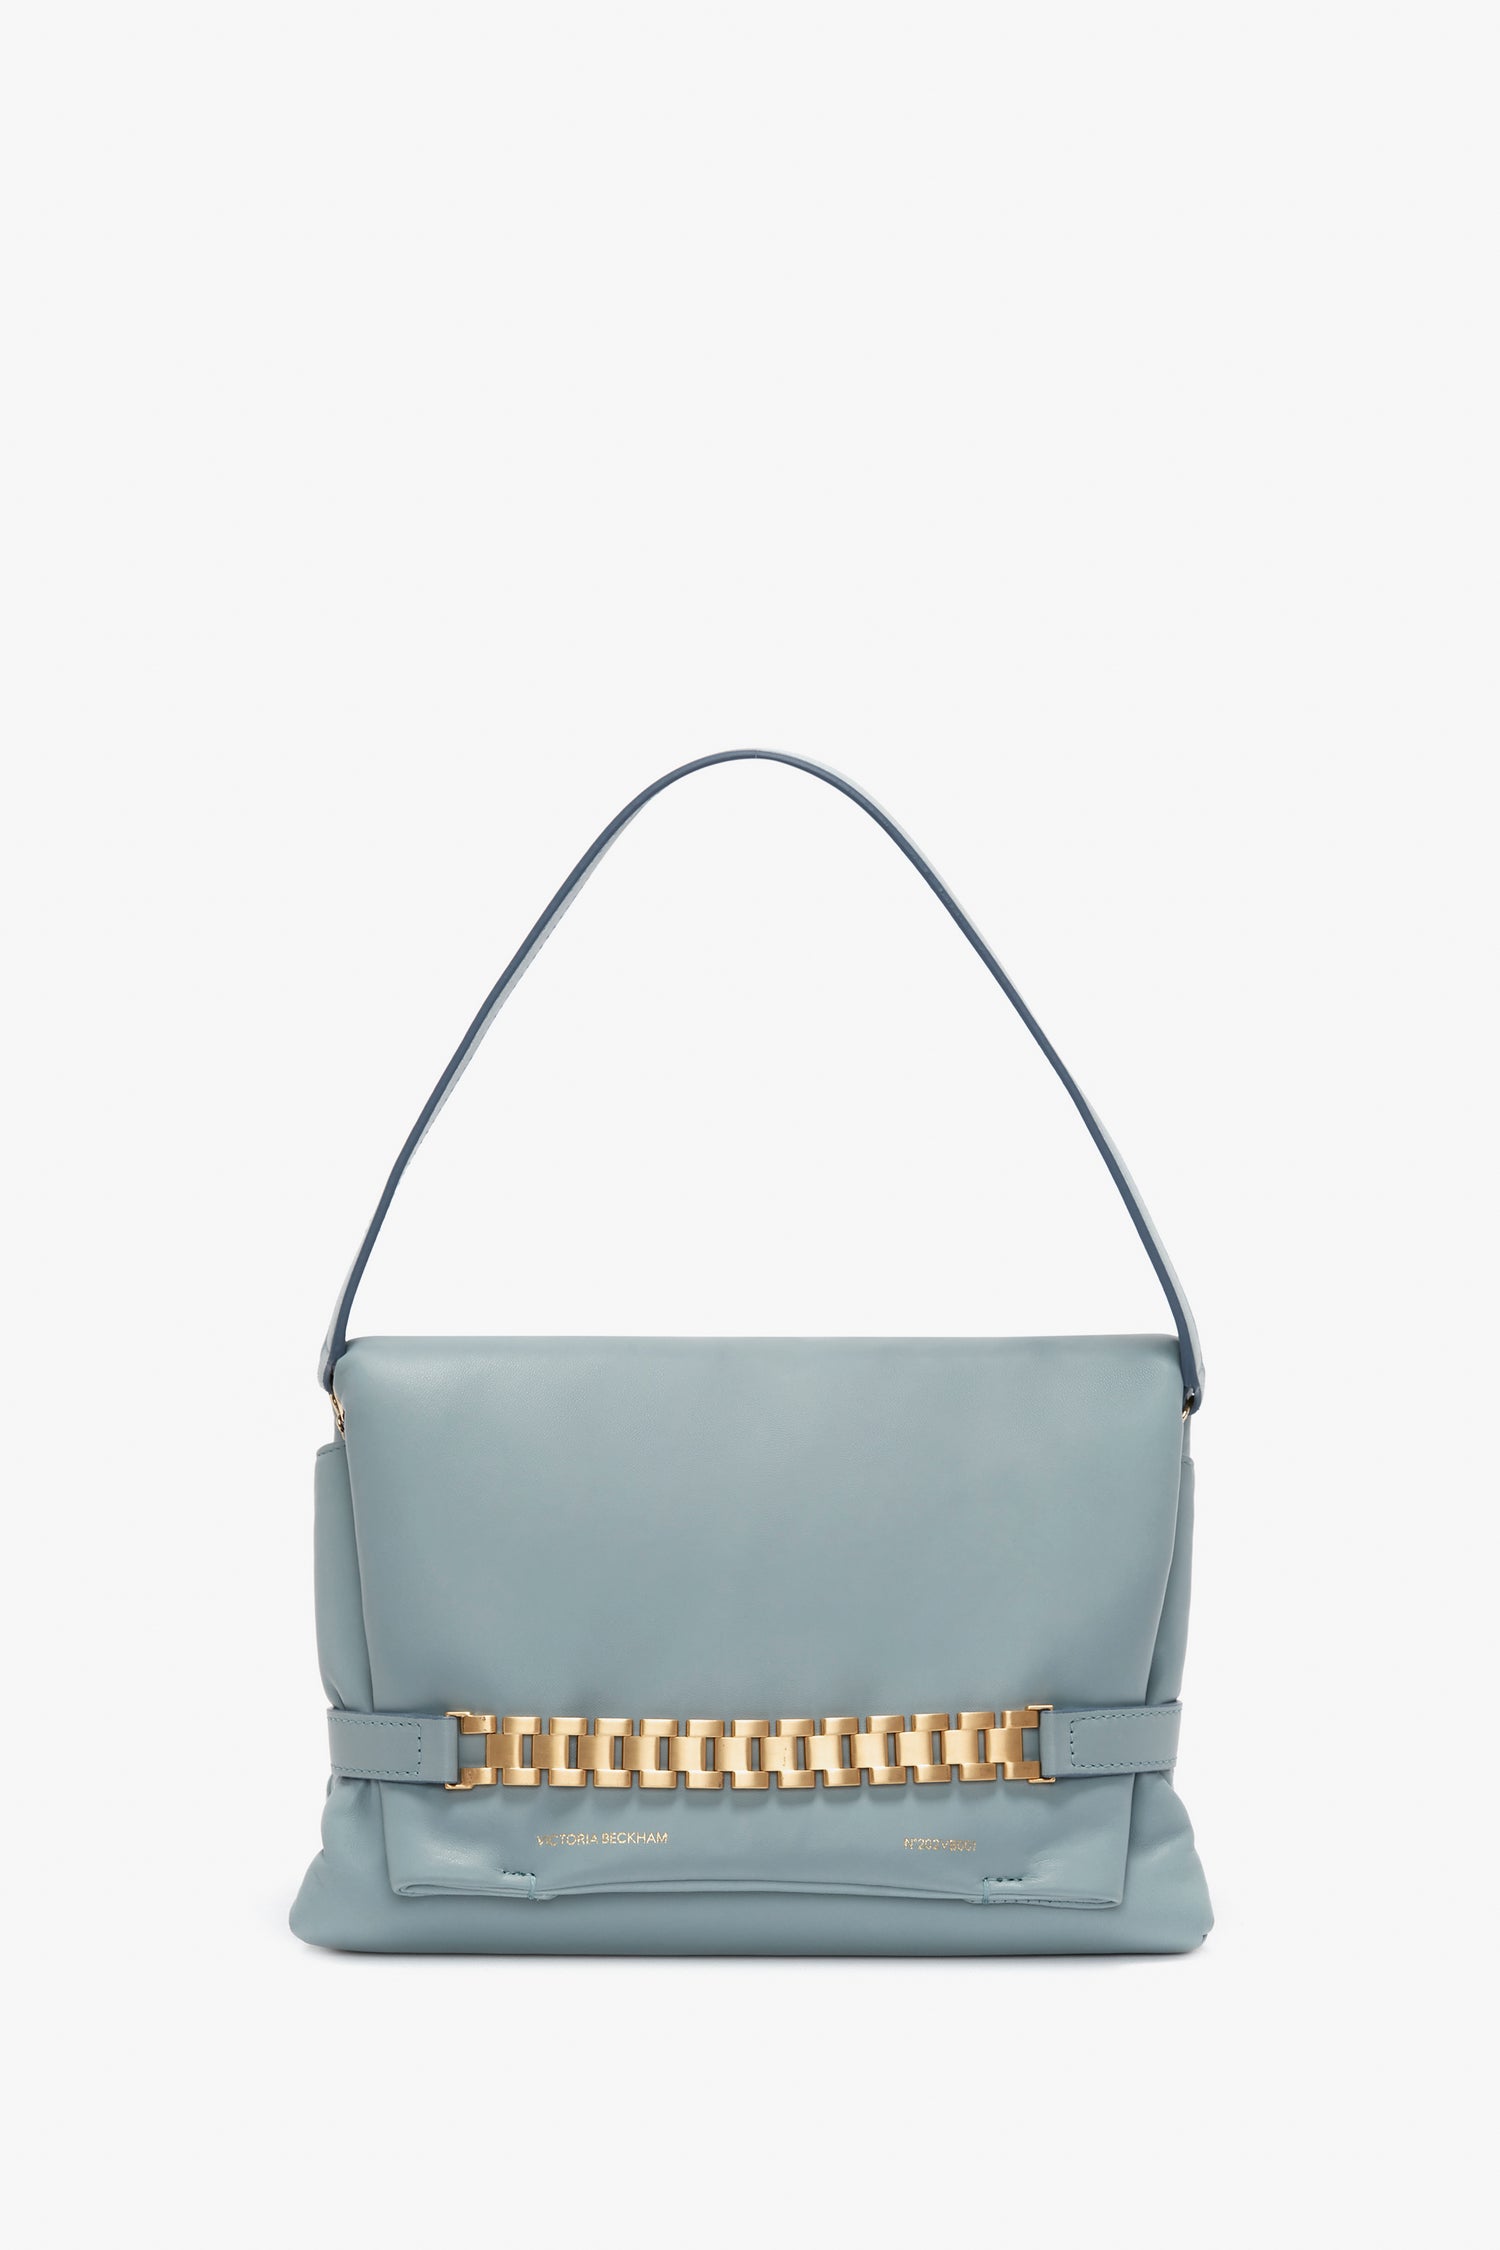 A light blue Puffy Chain Pouch With Strap in Ice Leather shoulder bag with a gold chain detail on a plain white background by Victoria Beckham.